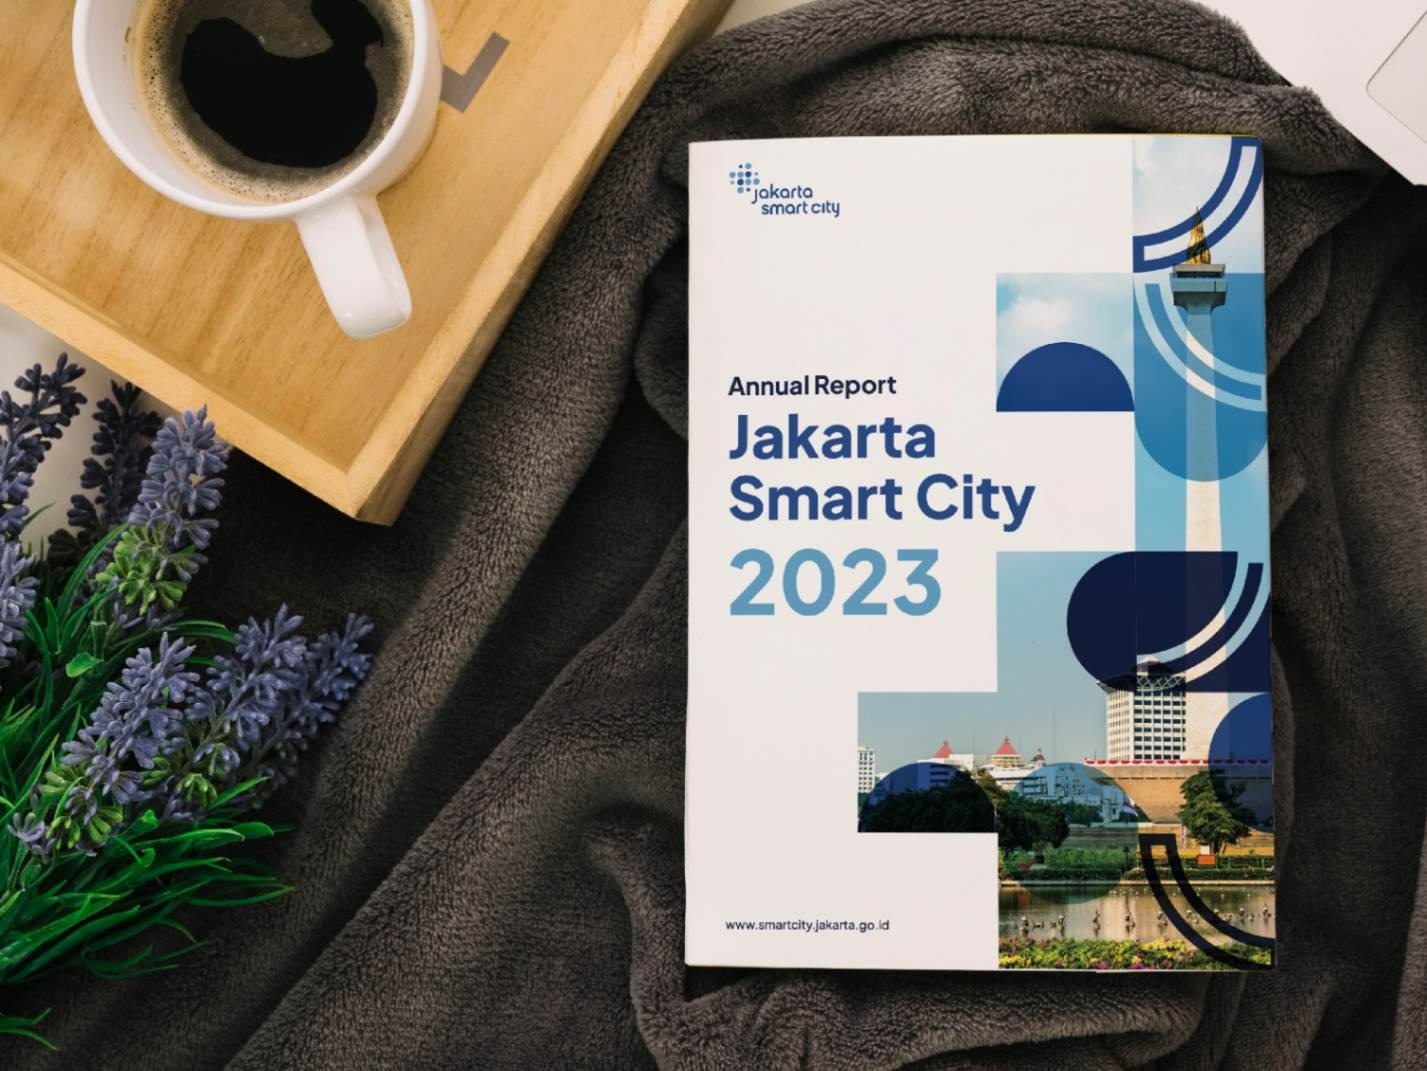 In 2023, there were several achievements accomplished by JSC. Let's take a look at them in this Annual Report!